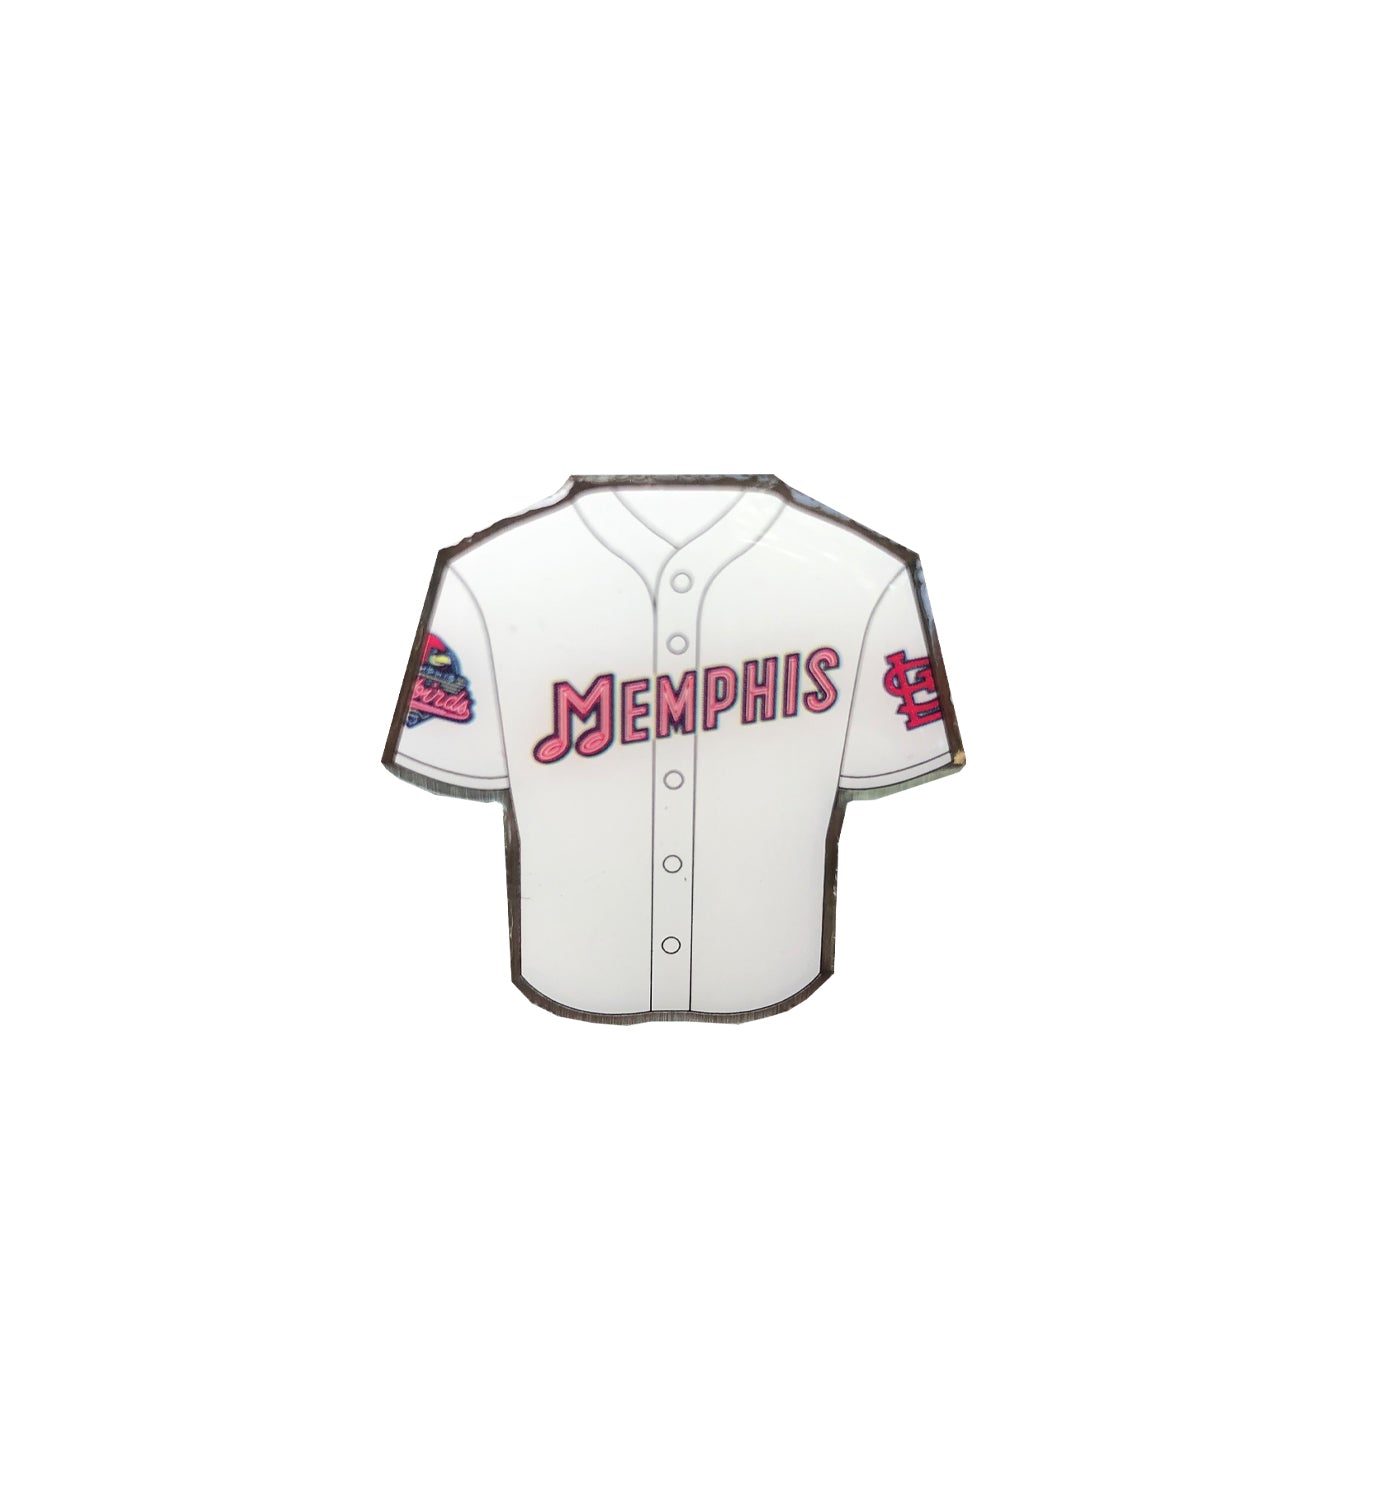 Memphis Redbirds on X: How fly are these jerseys? 🔥 The first